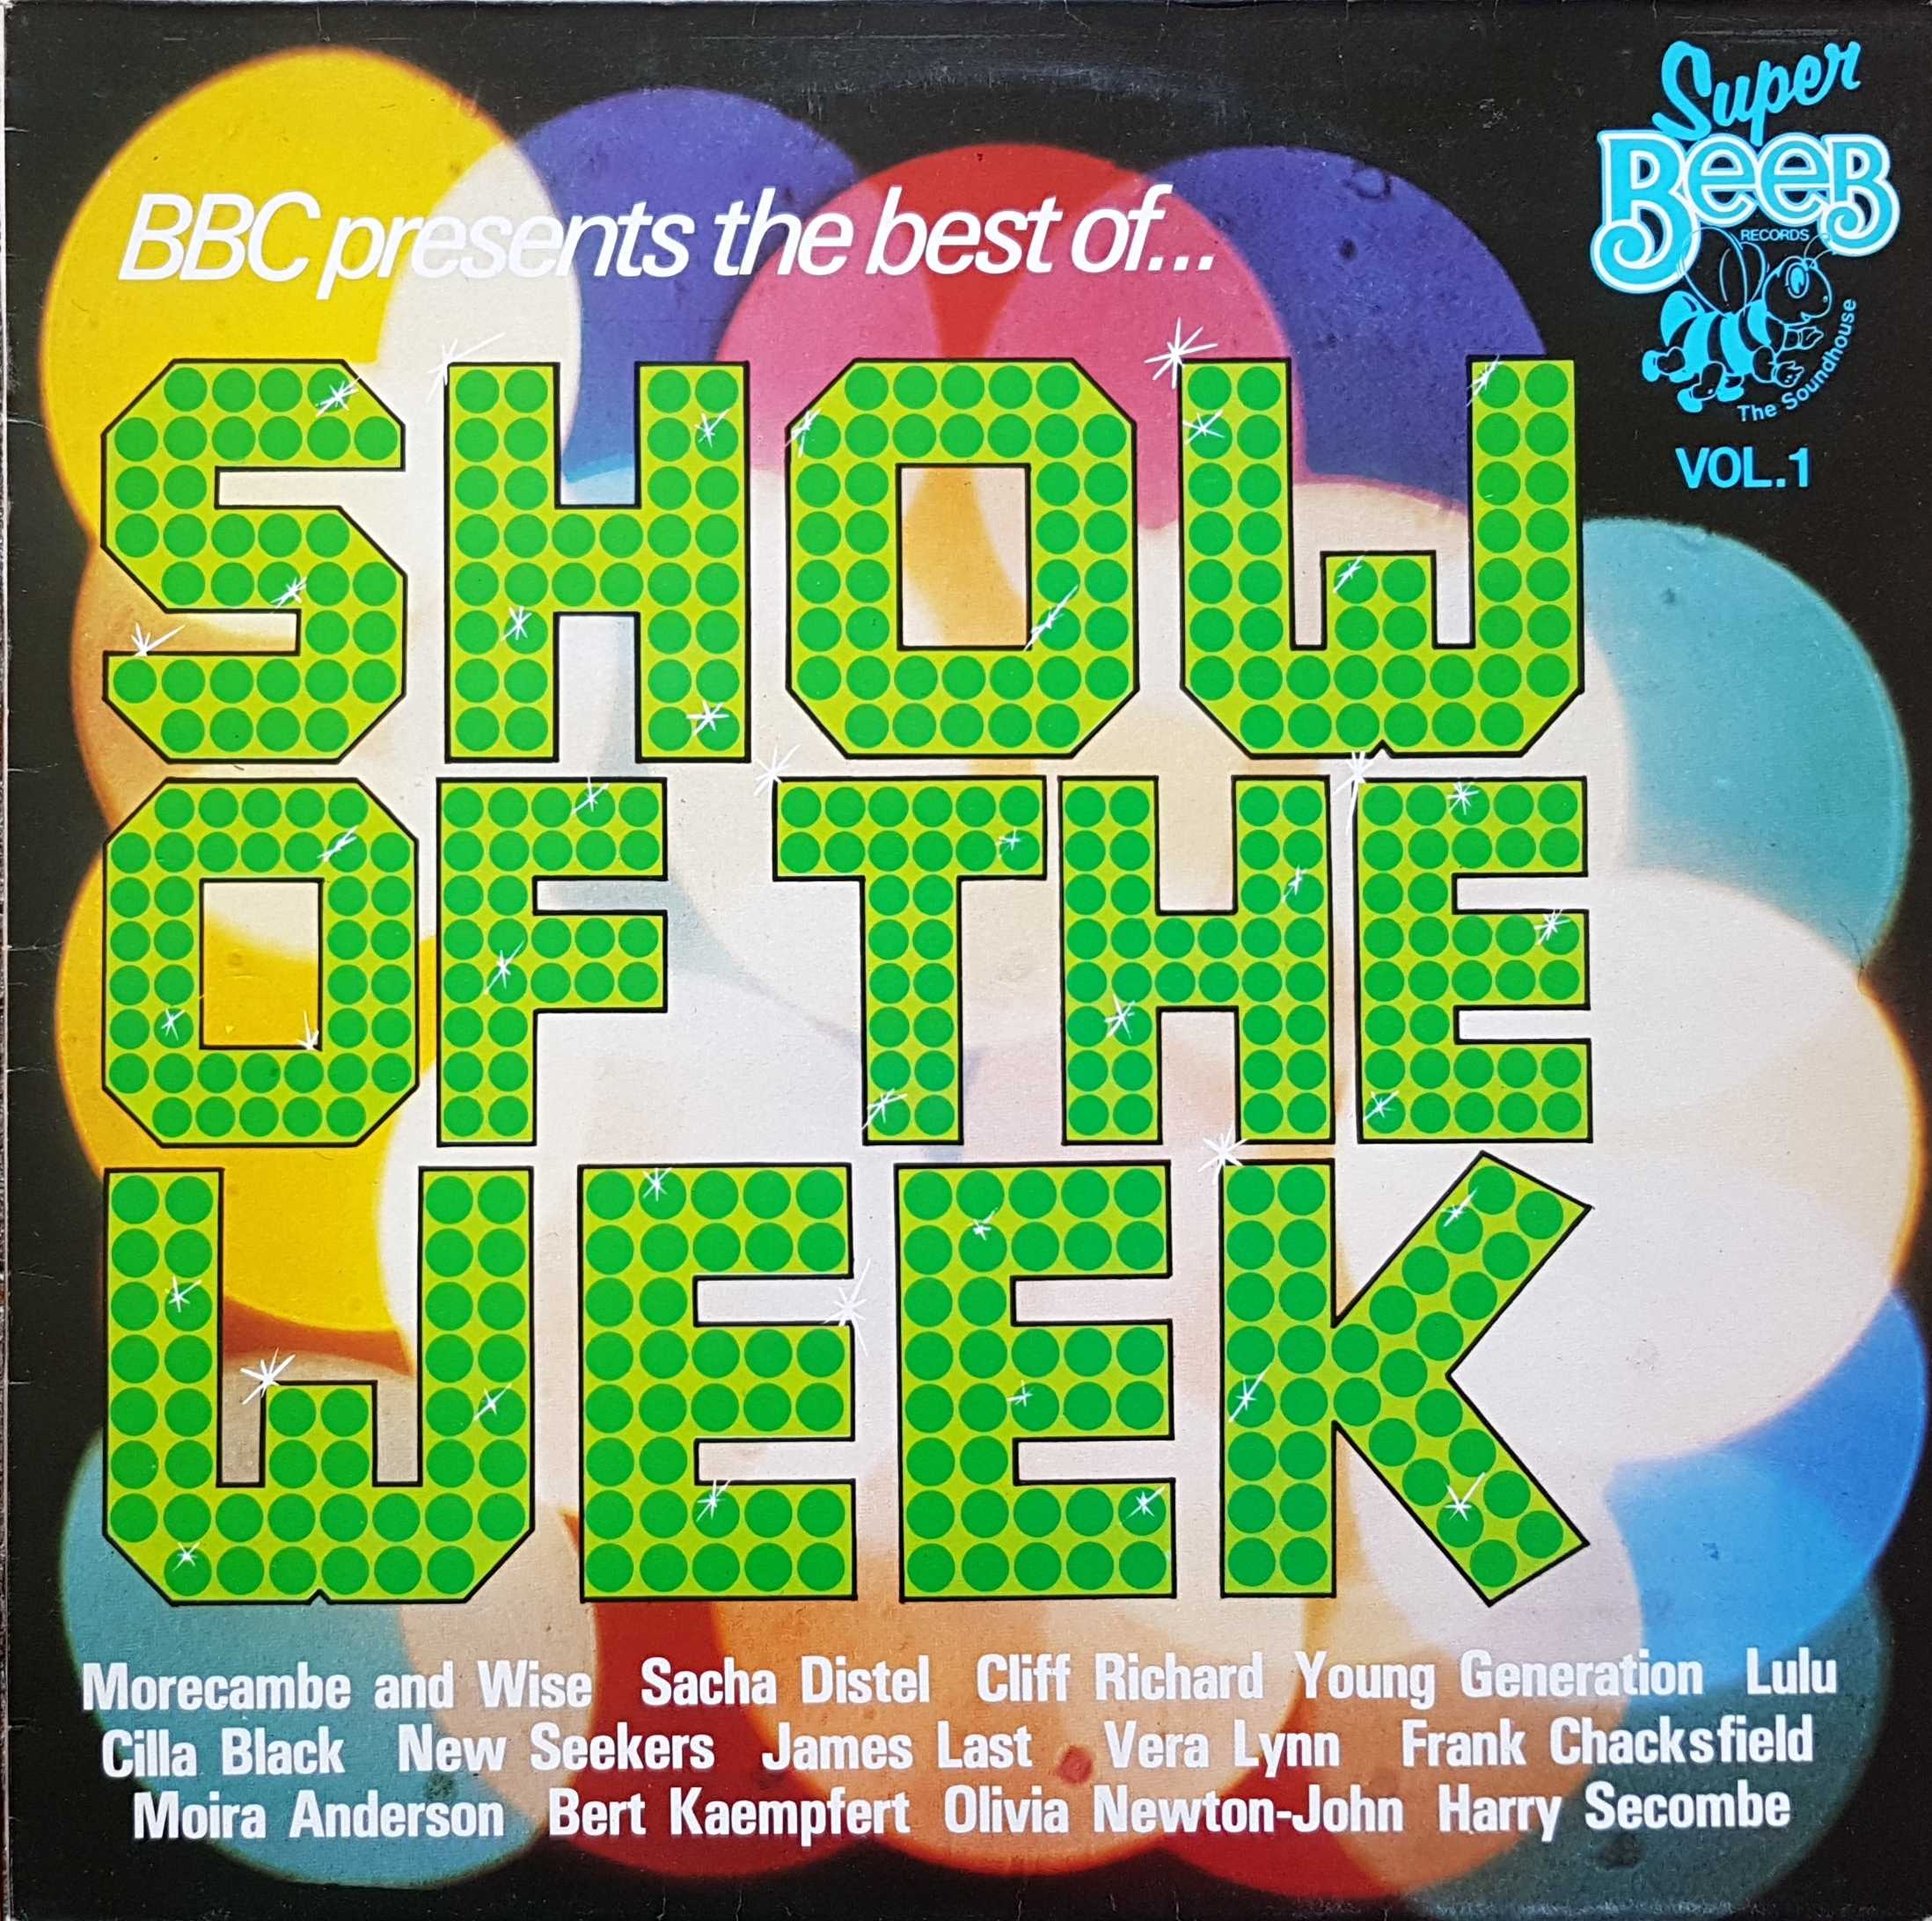 Picture of Show of the week - Volume 1 by artist Various from the BBC albums - Records and Tapes library